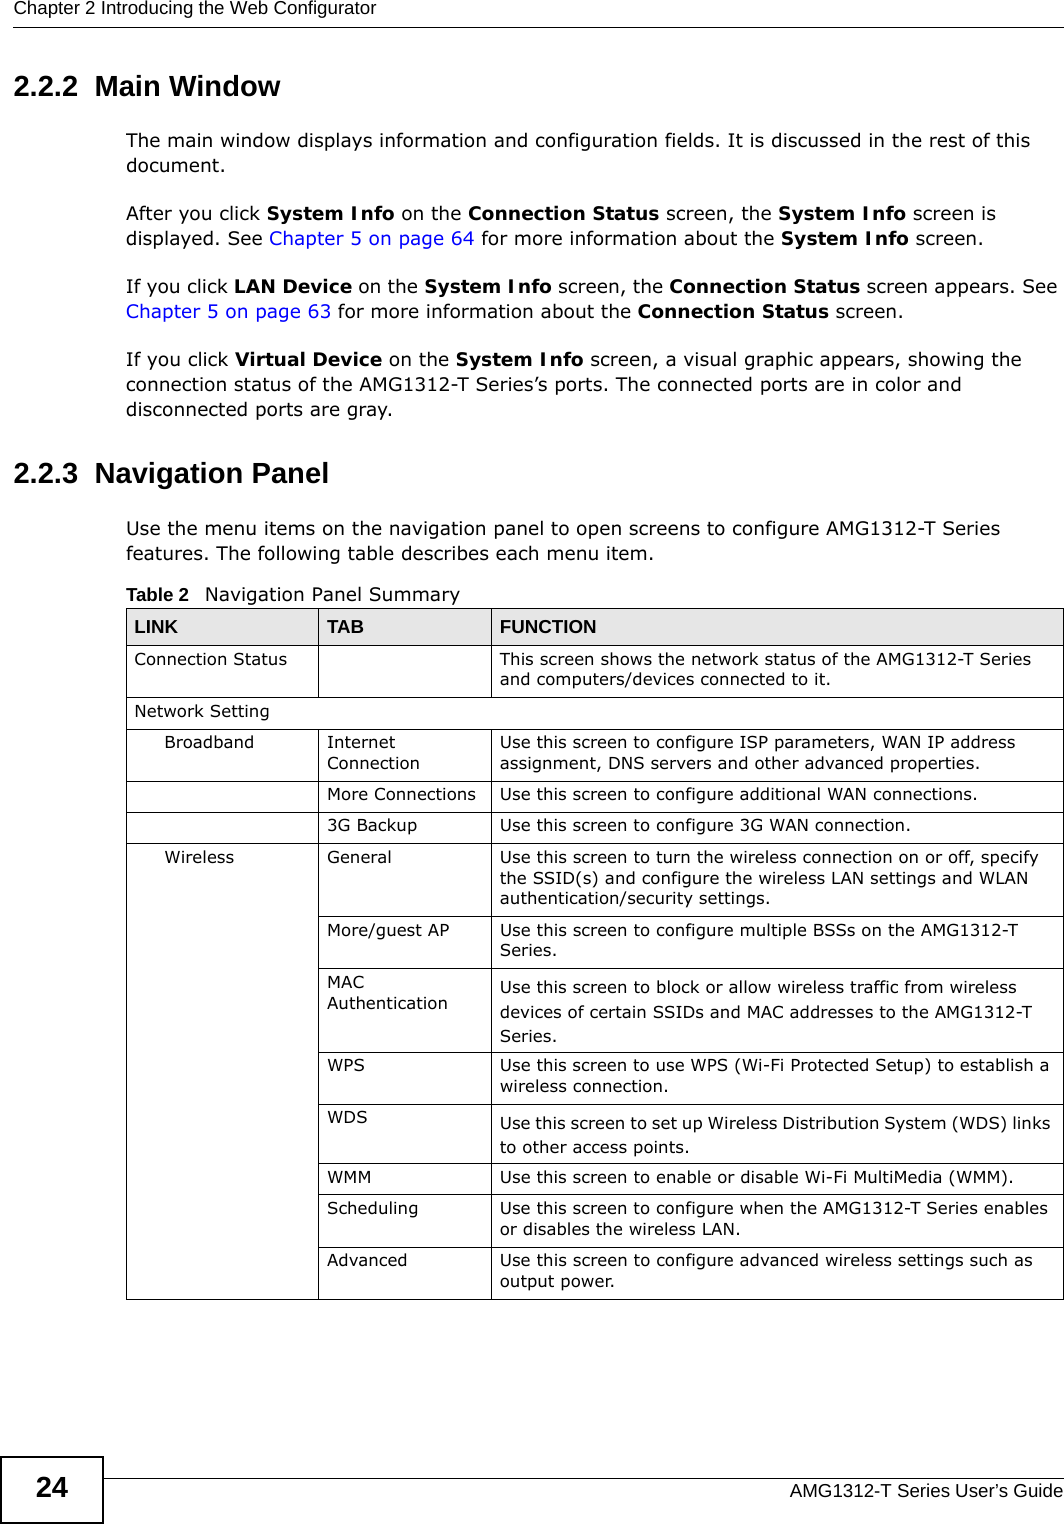 Chapter 2 Introducing the Web ConfiguratorAMG1312-T Series User’s Guide242.2.2  Main WindowThe main window displays information and configuration fields. It is discussed in the rest of this document.After you click System Info on the Connection Status screen, the System Info screen is displayed. See Chapter 5 on page 64 for more information about the System Info screen.If you click LAN Device on the System Info screen, the Connection Status screen appears. See Chapter 5 on page 63 for more information about the Connection Status screen.If you click Virtual Device on the System Info screen, a visual graphic appears, showing the connection status of the AMG1312-T Series’s ports. The connected ports are in color and disconnected ports are gray.2.2.3  Navigation PanelUse the menu items on the navigation panel to open screens to configure AMG1312-T Series features. The following table describes each menu item.Table 2   Navigation Panel SummaryLINK TAB FUNCTIONConnection Status This screen shows the network status of the AMG1312-T Series and computers/devices connected to it.Network SettingBroadband Internet ConnectionUse this screen to configure ISP parameters, WAN IP address assignment, DNS servers and other advanced properties.More Connections Use this screen to configure additional WAN connections.3G Backup Use this screen to configure 3G WAN connection.Wireless General Use this screen to turn the wireless connection on or off, specify the SSID(s) and configure the wireless LAN settings and WLAN authentication/security settings.More/guest AP Use this screen to configure multiple BSSs on the AMG1312-T Series.MAC Authentication Use this screen to block or allow wireless traffic from wireless devices of certain SSIDs and MAC addresses to the AMG1312-T Series.WPS Use this screen to use WPS (Wi-Fi Protected Setup) to establish a wireless connection.WDS Use this screen to set up Wireless Distribution System (WDS) links to other access points.WMM Use this screen to enable or disable Wi-Fi MultiMedia (WMM).Scheduling Use this screen to configure when the AMG1312-T Series enables or disables the wireless LAN.Advanced Use this screen to configure advanced wireless settings such as output power.